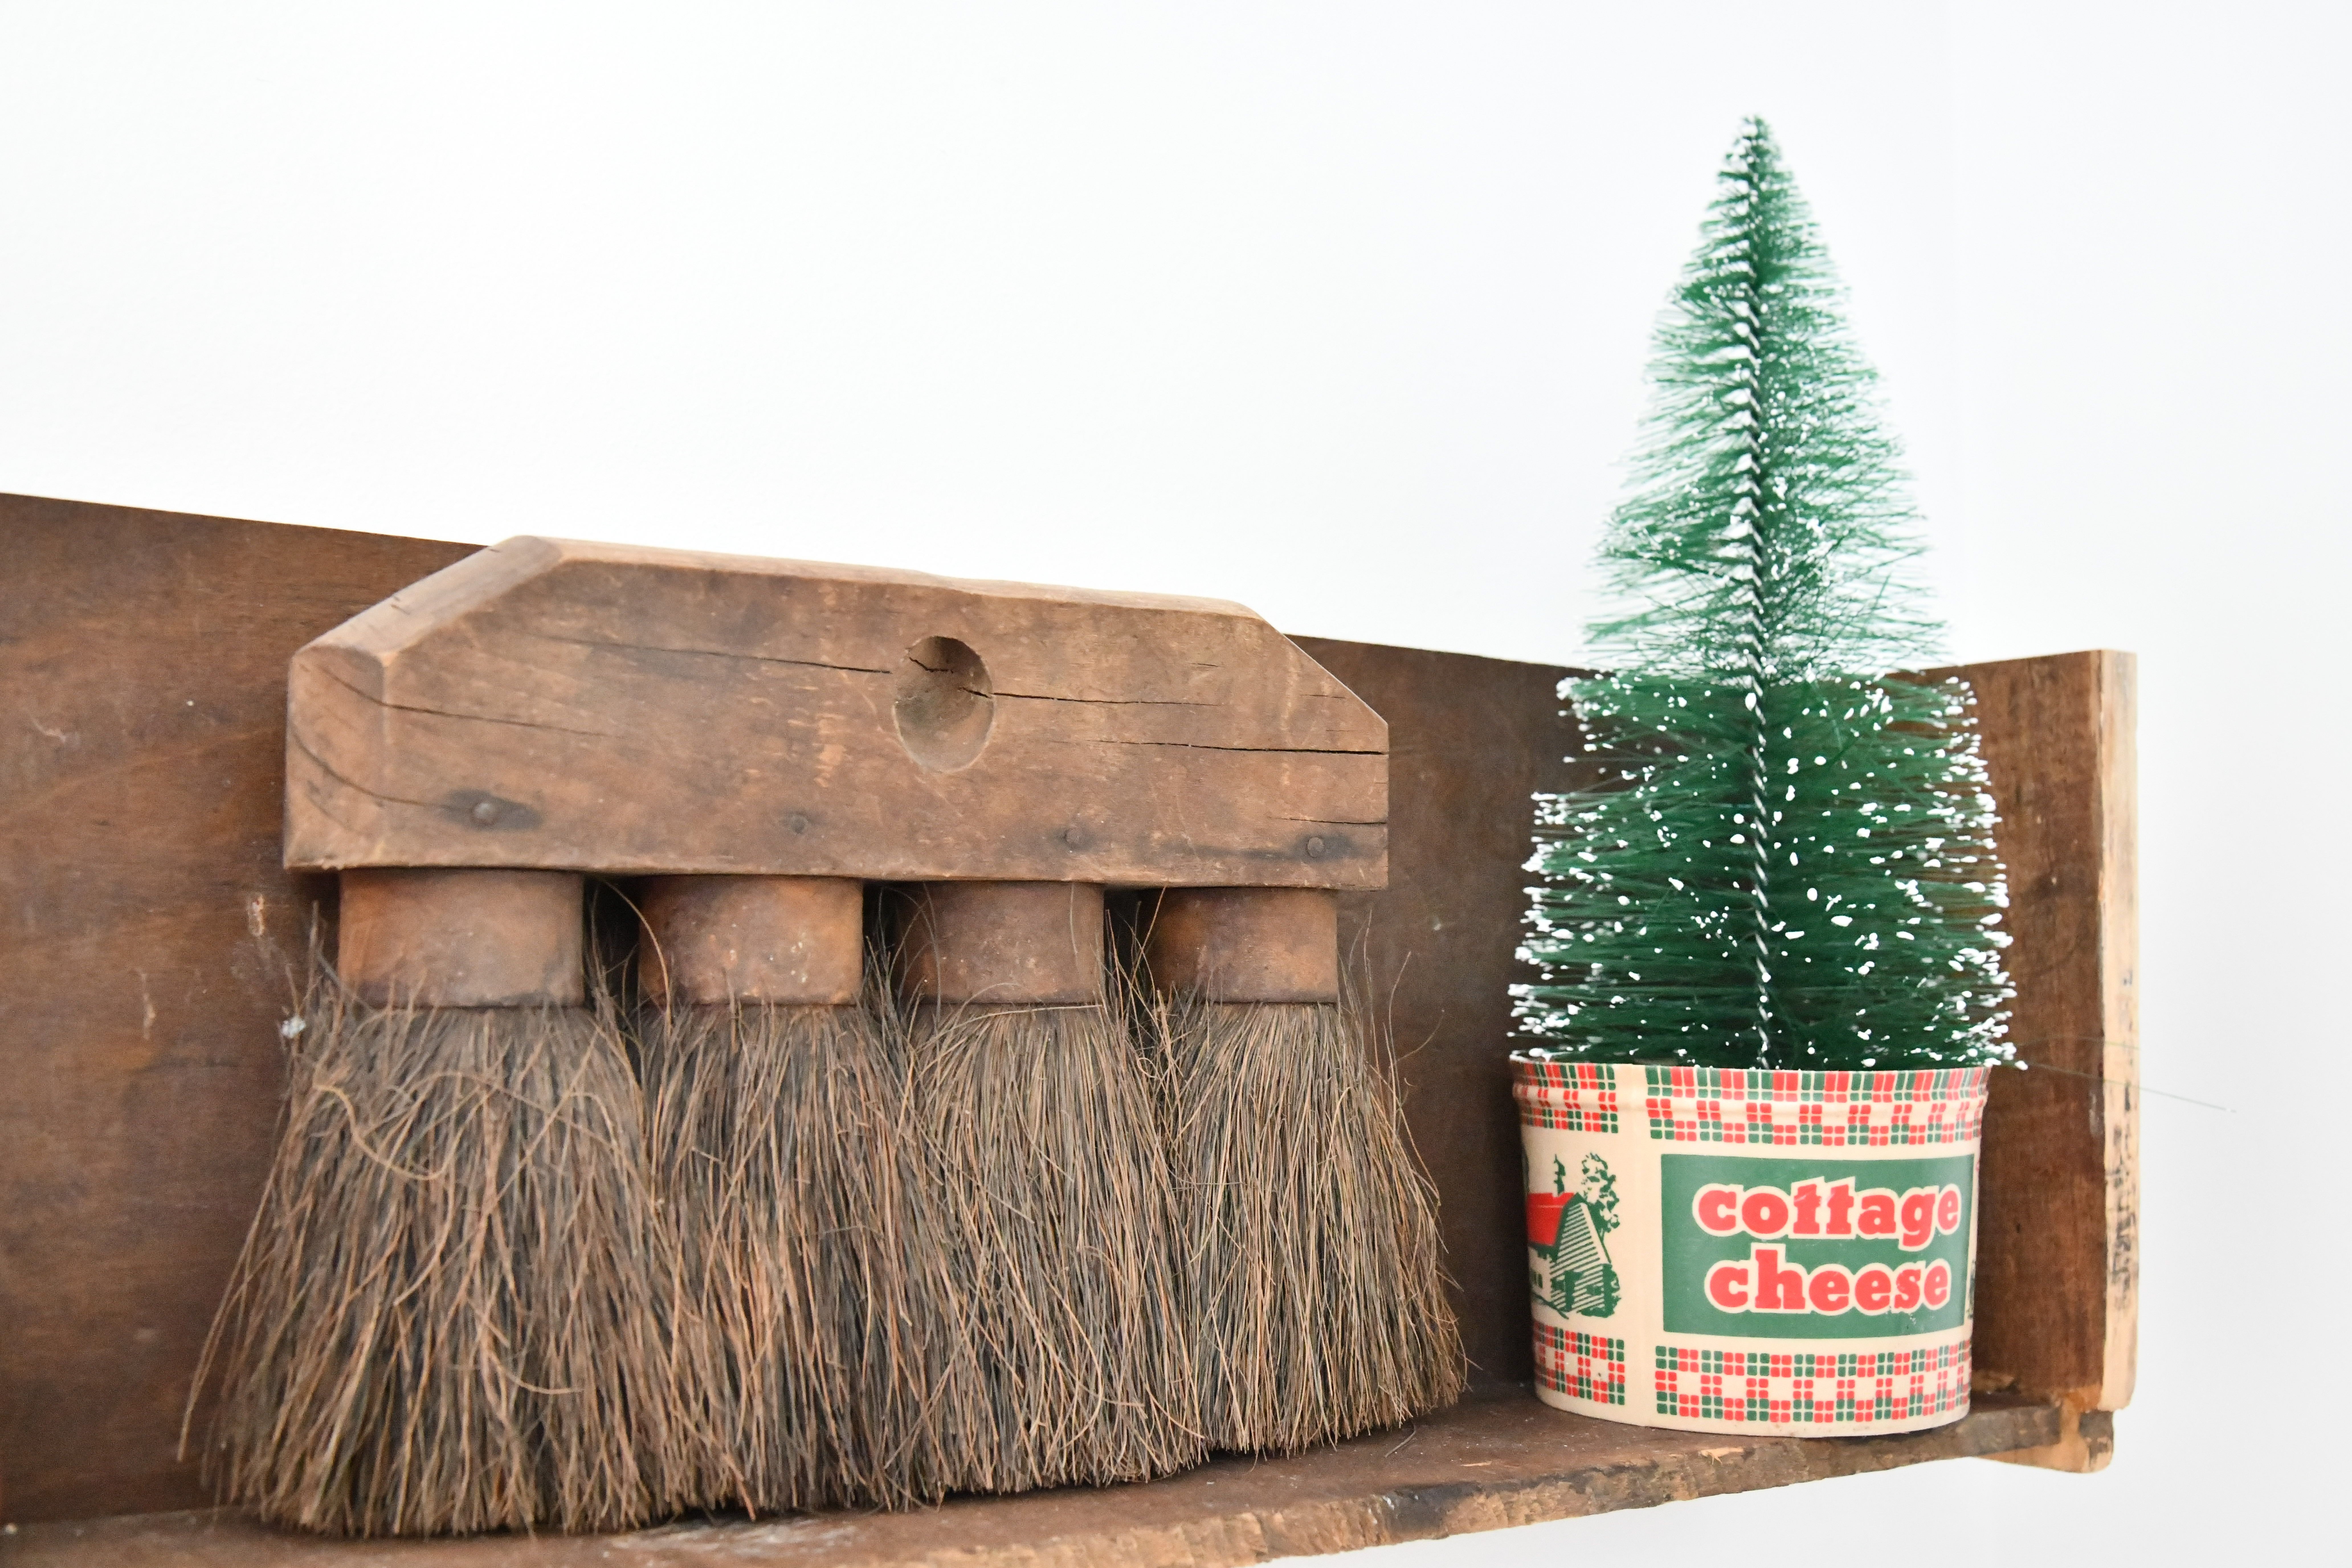 Vintage Christmas Tree Stands Mini Tree in vintage cottage cheese container with vintage brush on shelf 